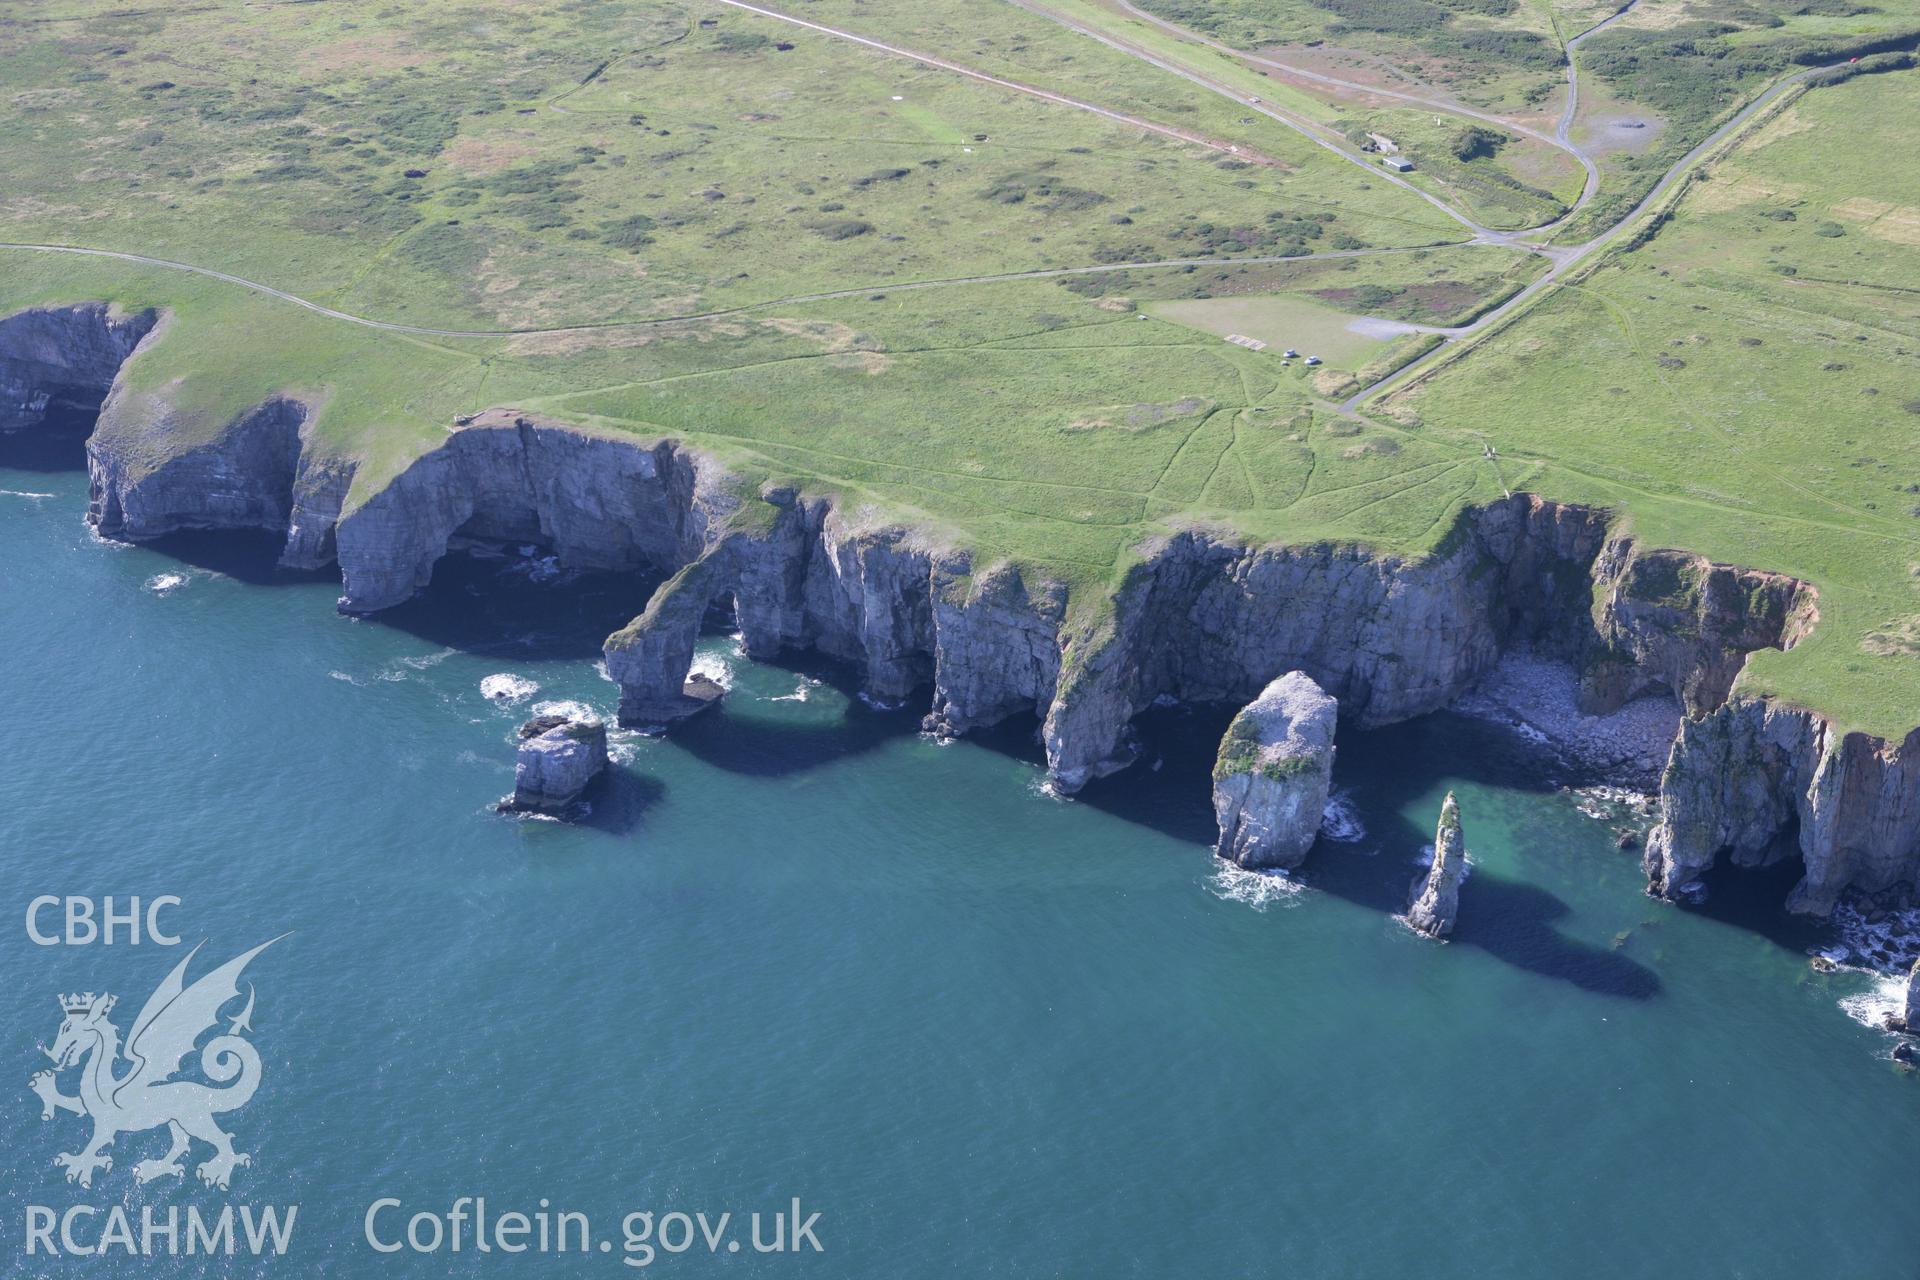 RCAHMW colour oblique aerial photograph of the Green Bridge (of Wales) and Elegug Stacks. Taken on 30 July 2007 by Toby Driver